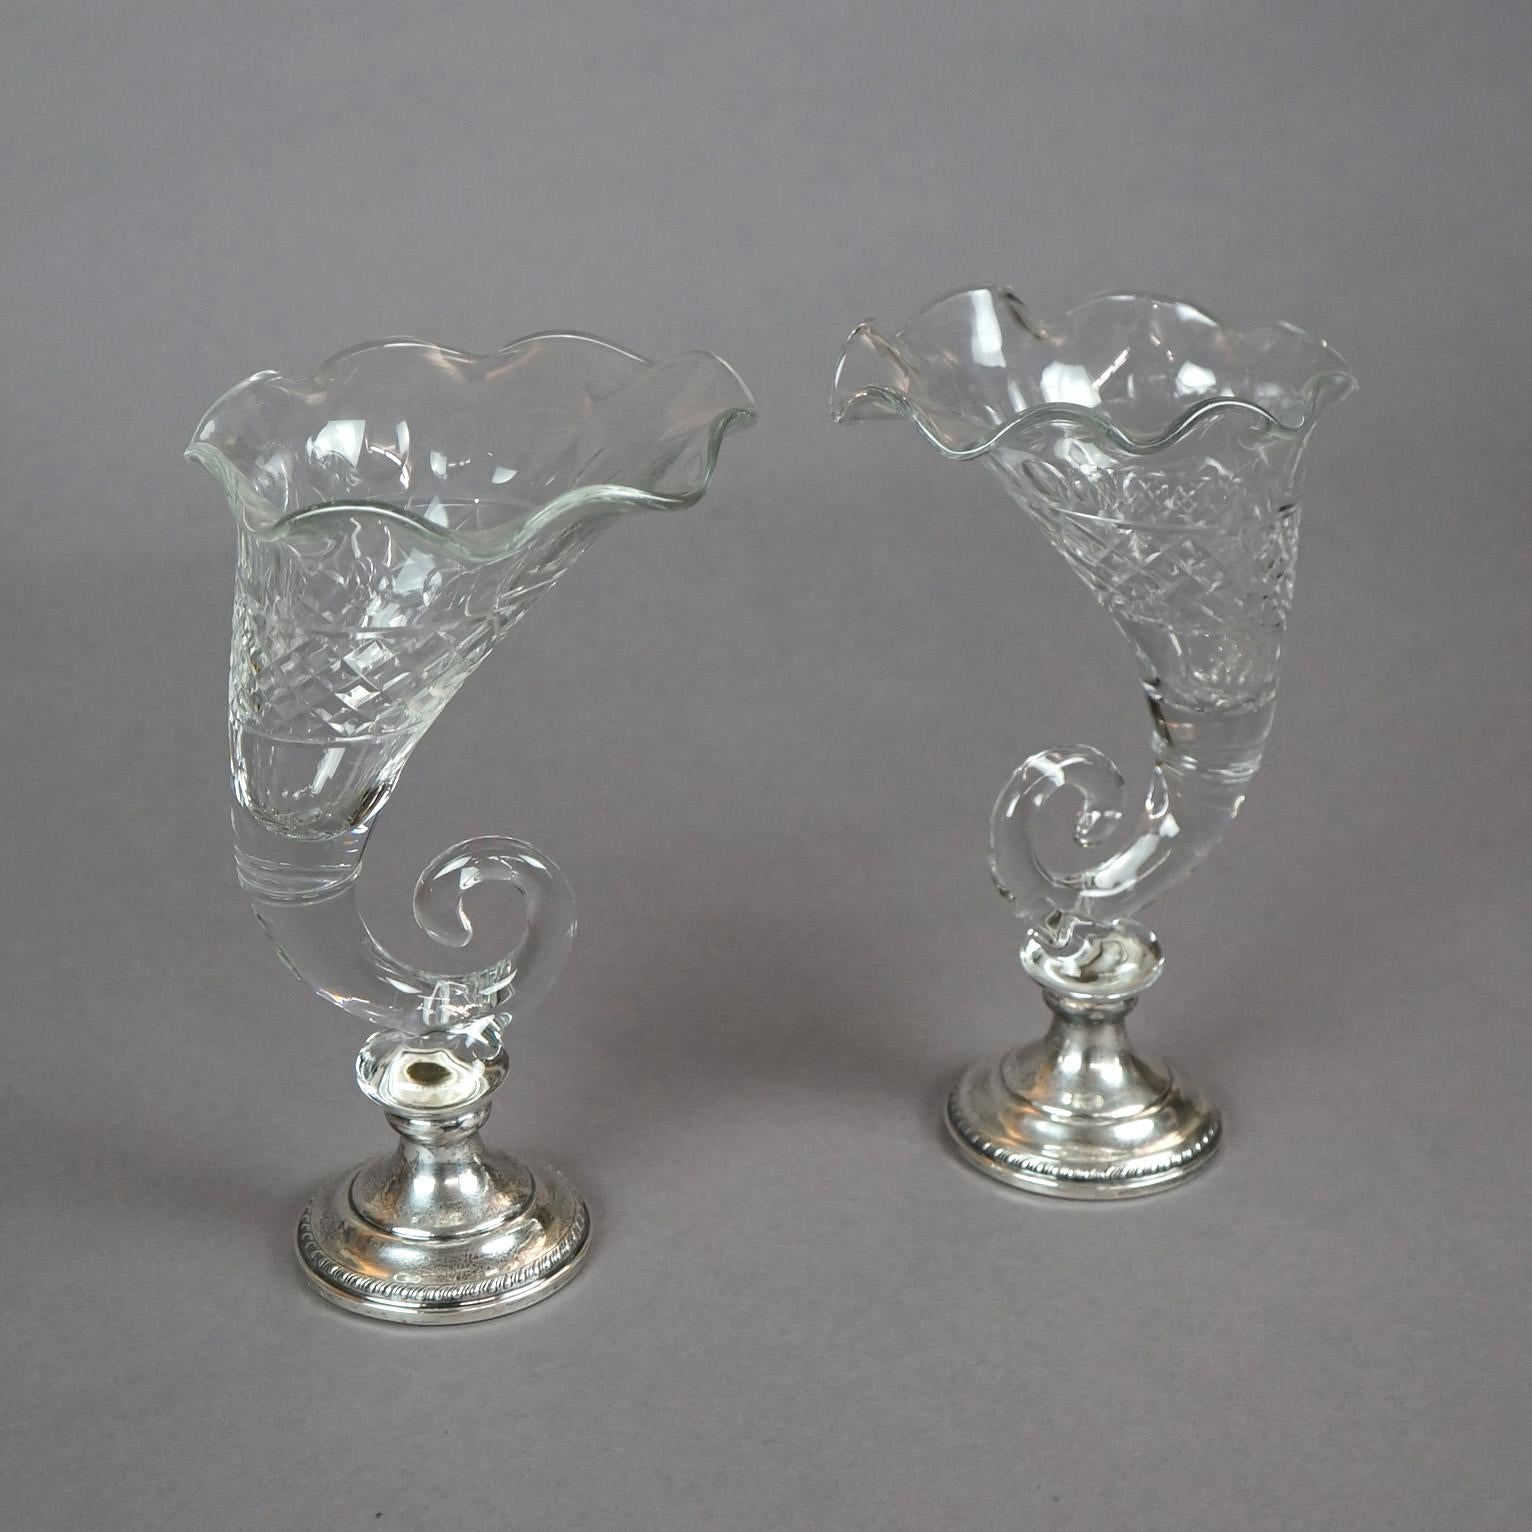 A pair of table vases offers cut glass in cornucopia form on sterling silver weighted based, circa 1920

Measures - 10.75